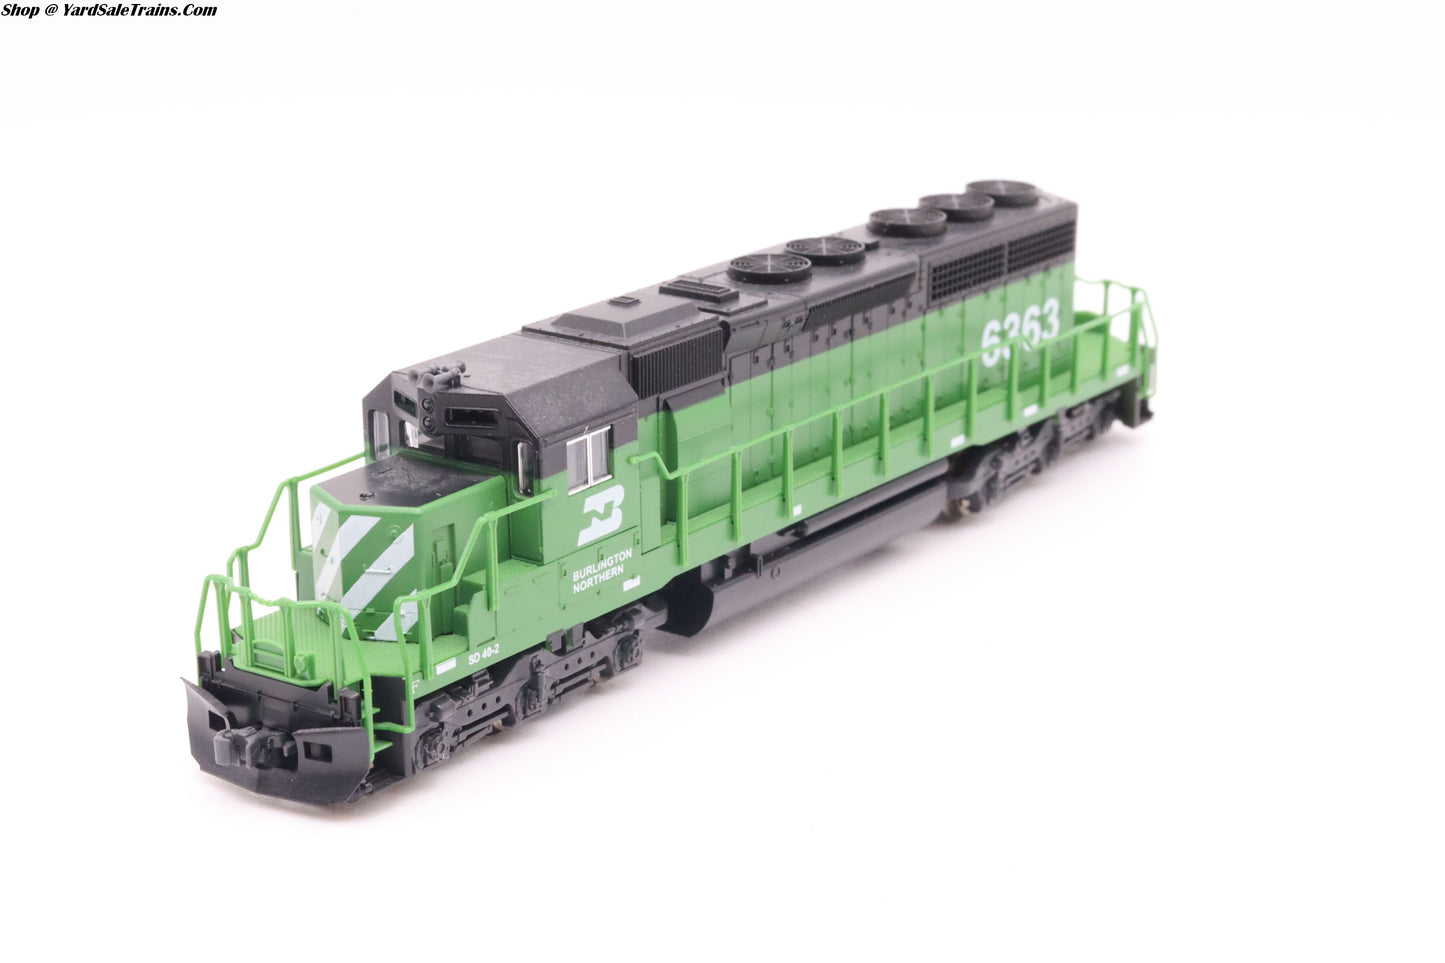 KAT-176-4802 - SD40-2 Early Burlington Northern - BN #6363 - Preowned